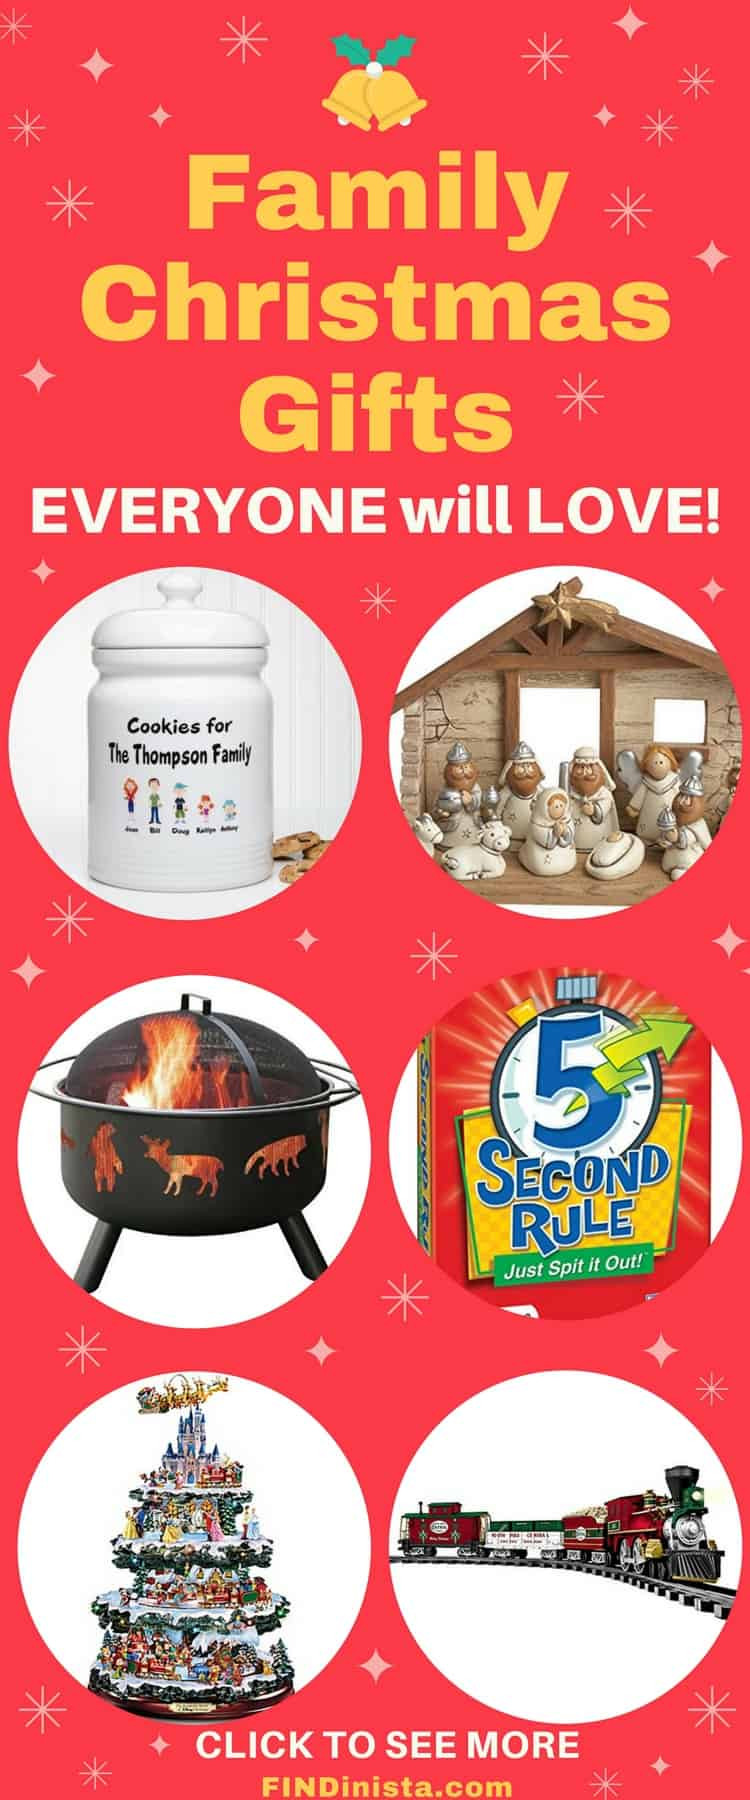 Holiday Gift Ideas Family
 Best Family Gift Ideas for Christmas Fun Gifts the Whole